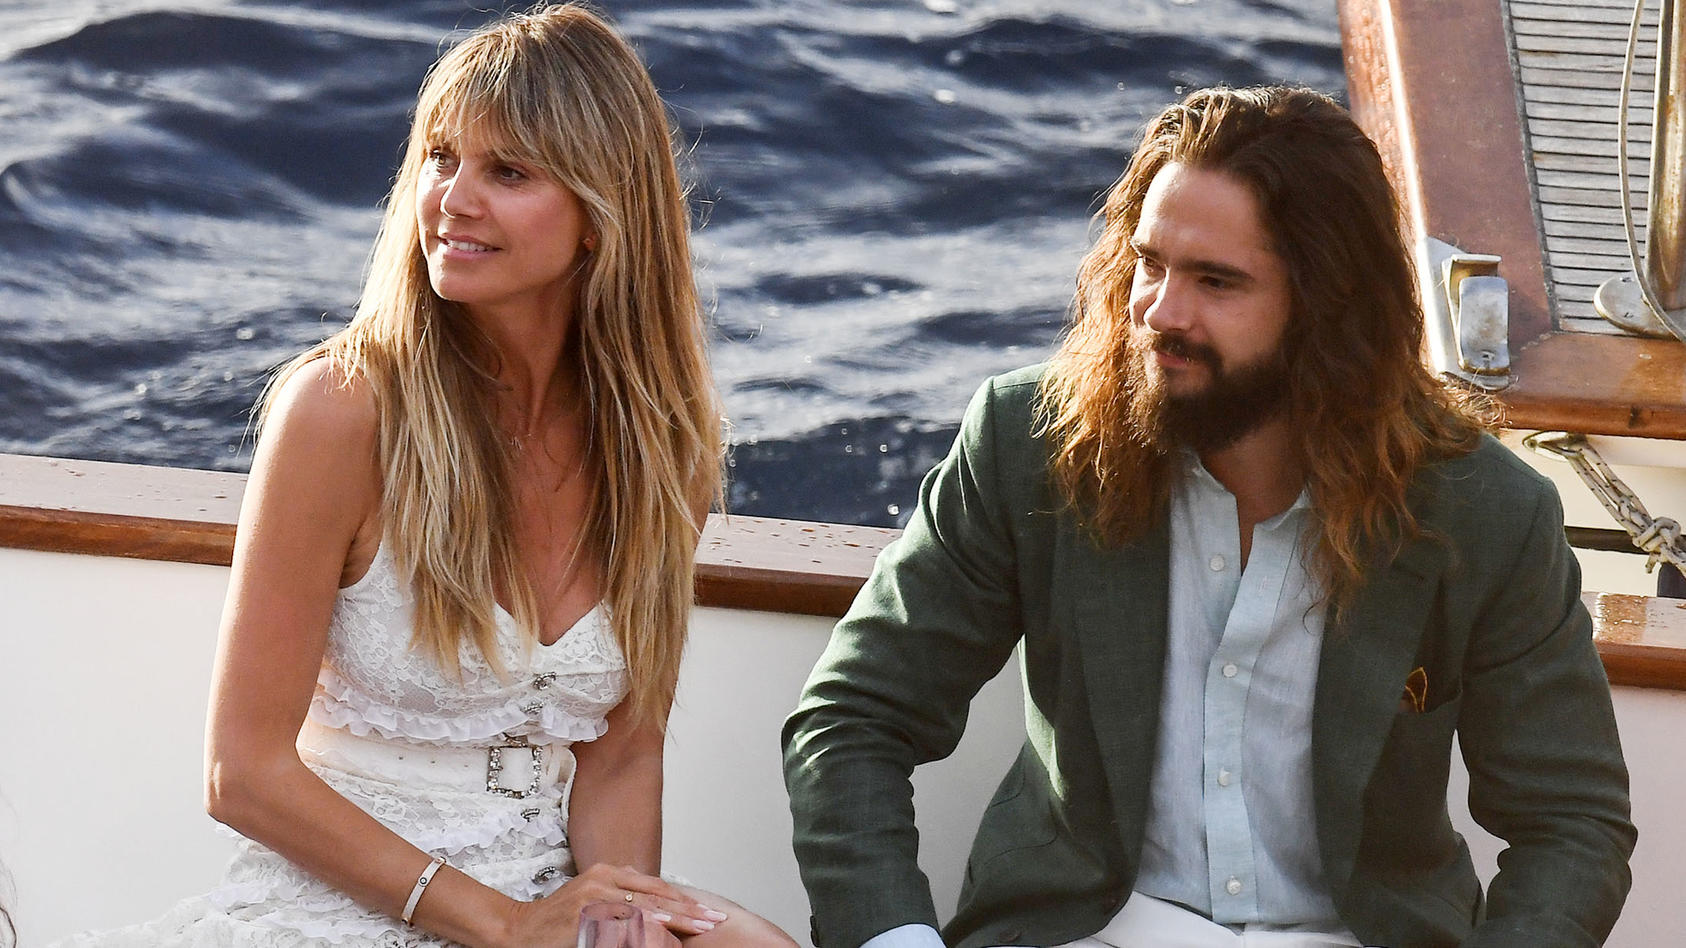 Heidi Klum and Tom Kaulitz are seen on a boat ahead their wedding on August 02, 2019 in Capri, Italy.Pictured: Heidi Klum and Tom KaulitzRef: SPL5107292 020819 NON-EXCLUSIVEPicture by: SplashNews.comSplash News and PicturesLos Angeles: 310-821-2666Ne